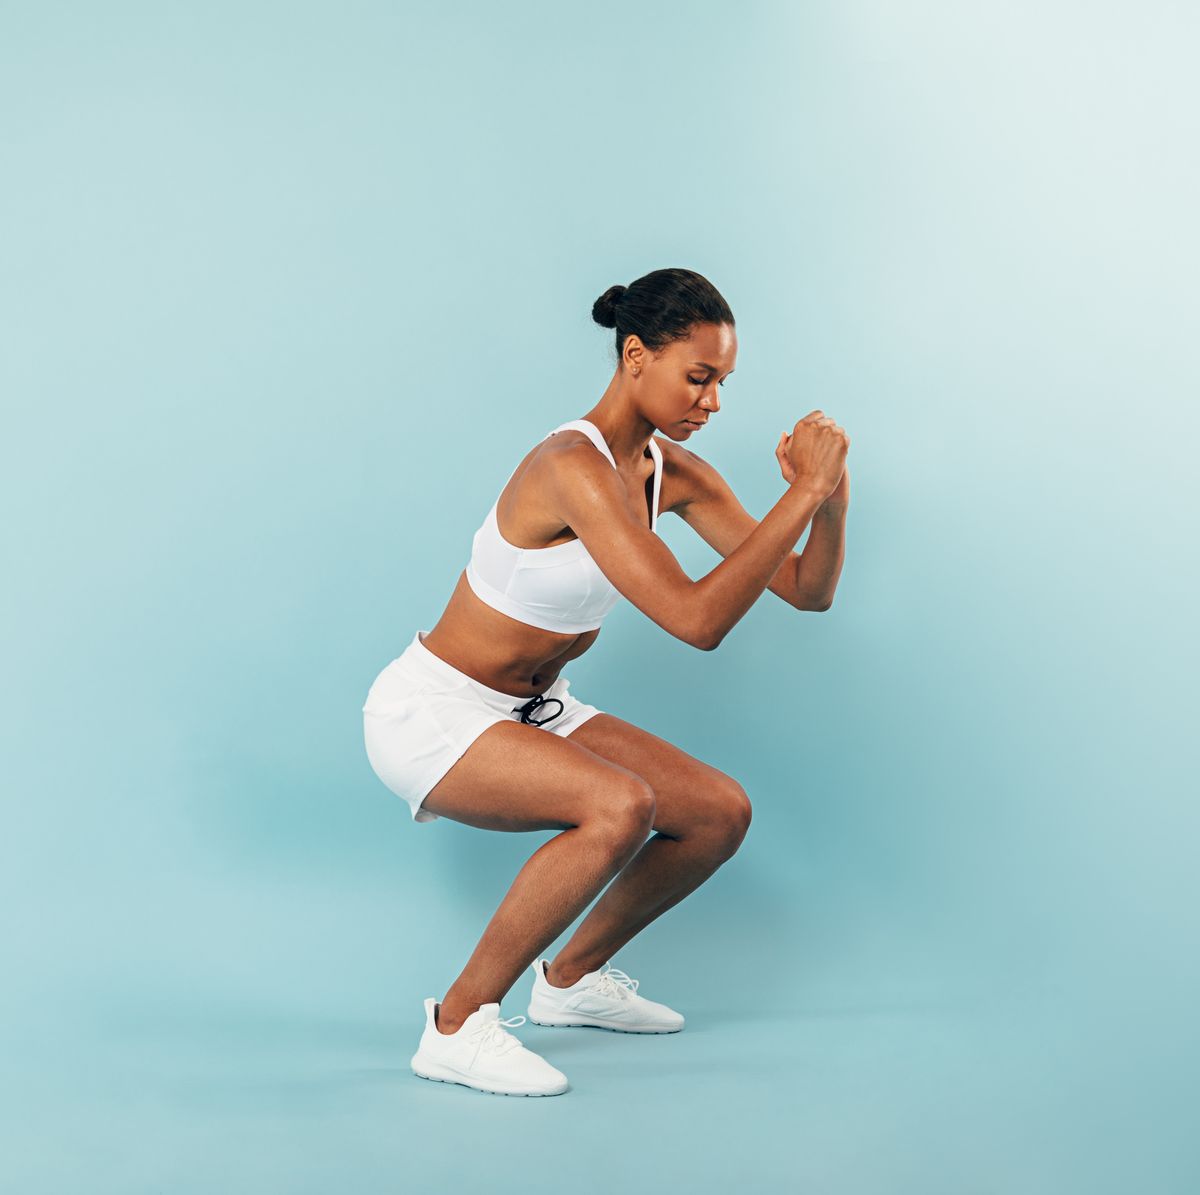 How To Get a Bigger Butt: 5 Best Glute Exercises You Should Be Doing